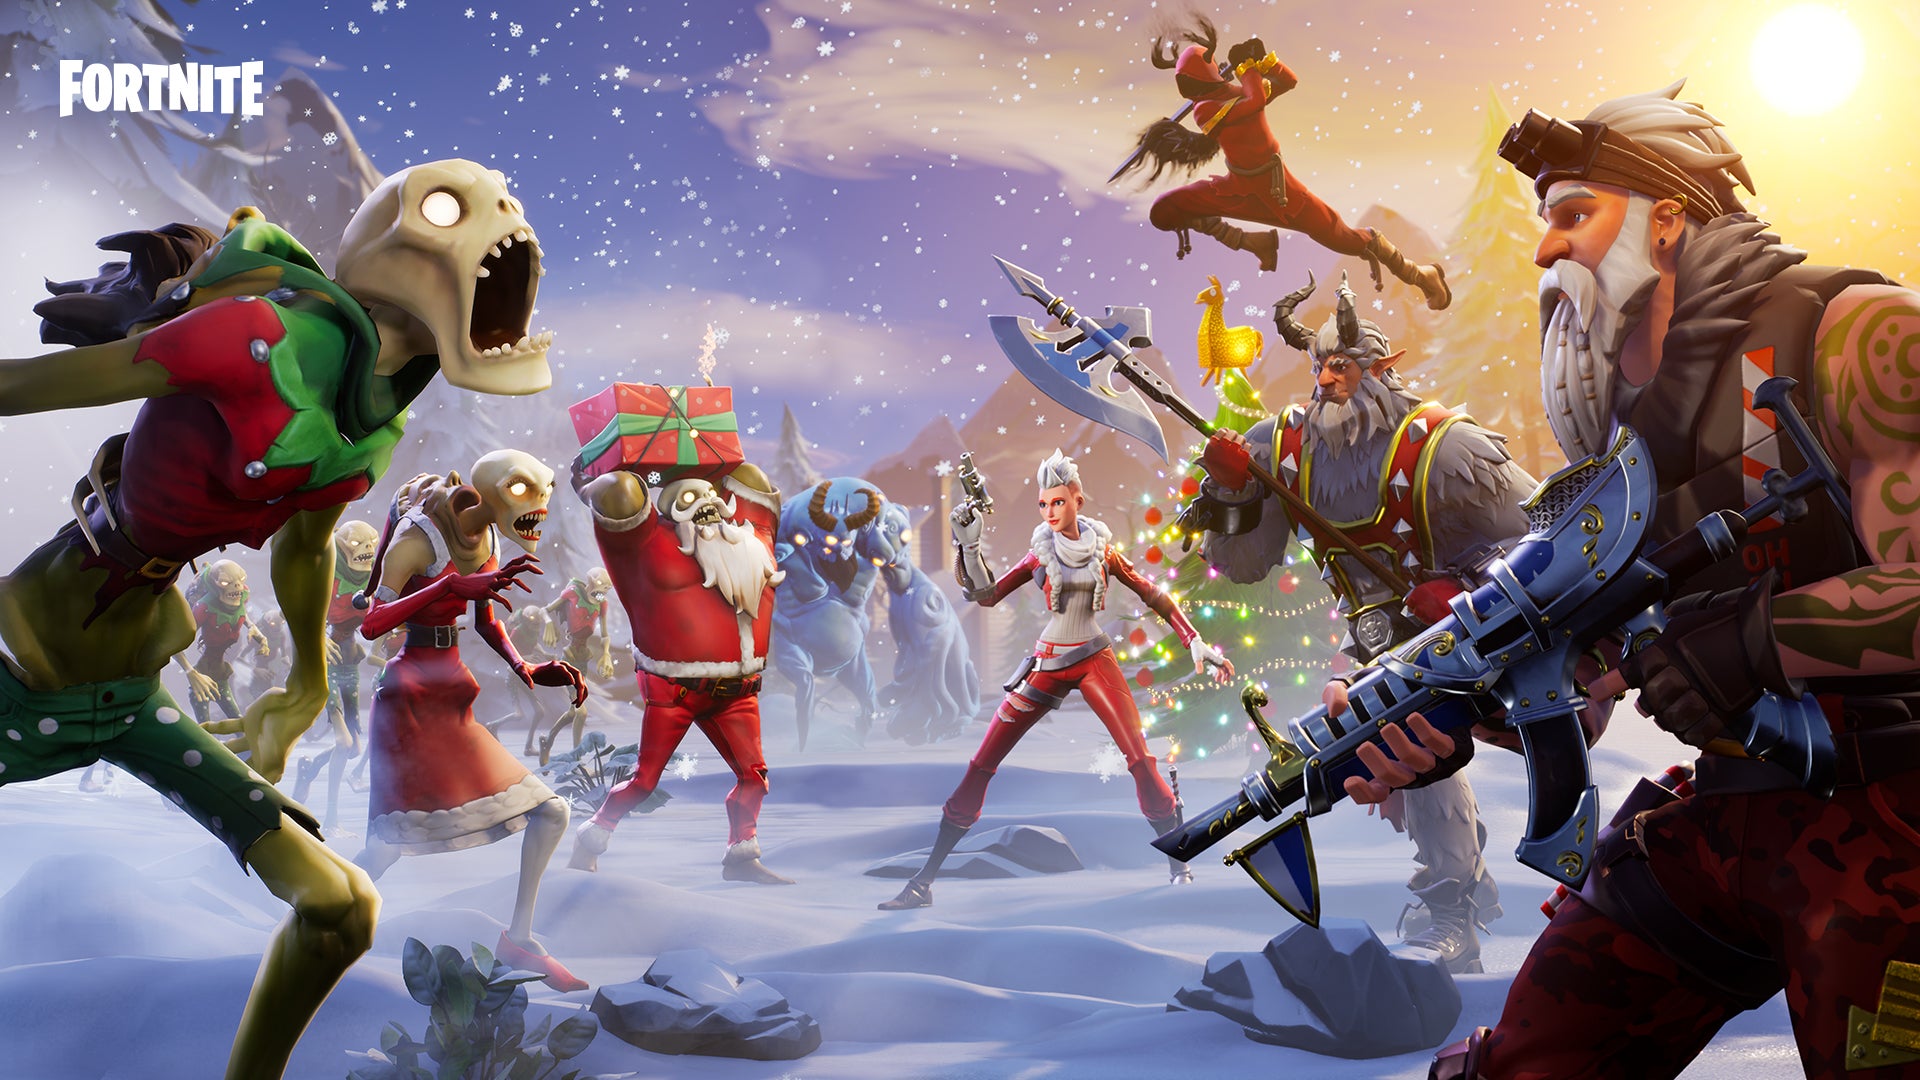 Image for Fortnite v7.10 patch adds 14 Days of Fortnite event, Winter themed islands and Frostnite survival mode